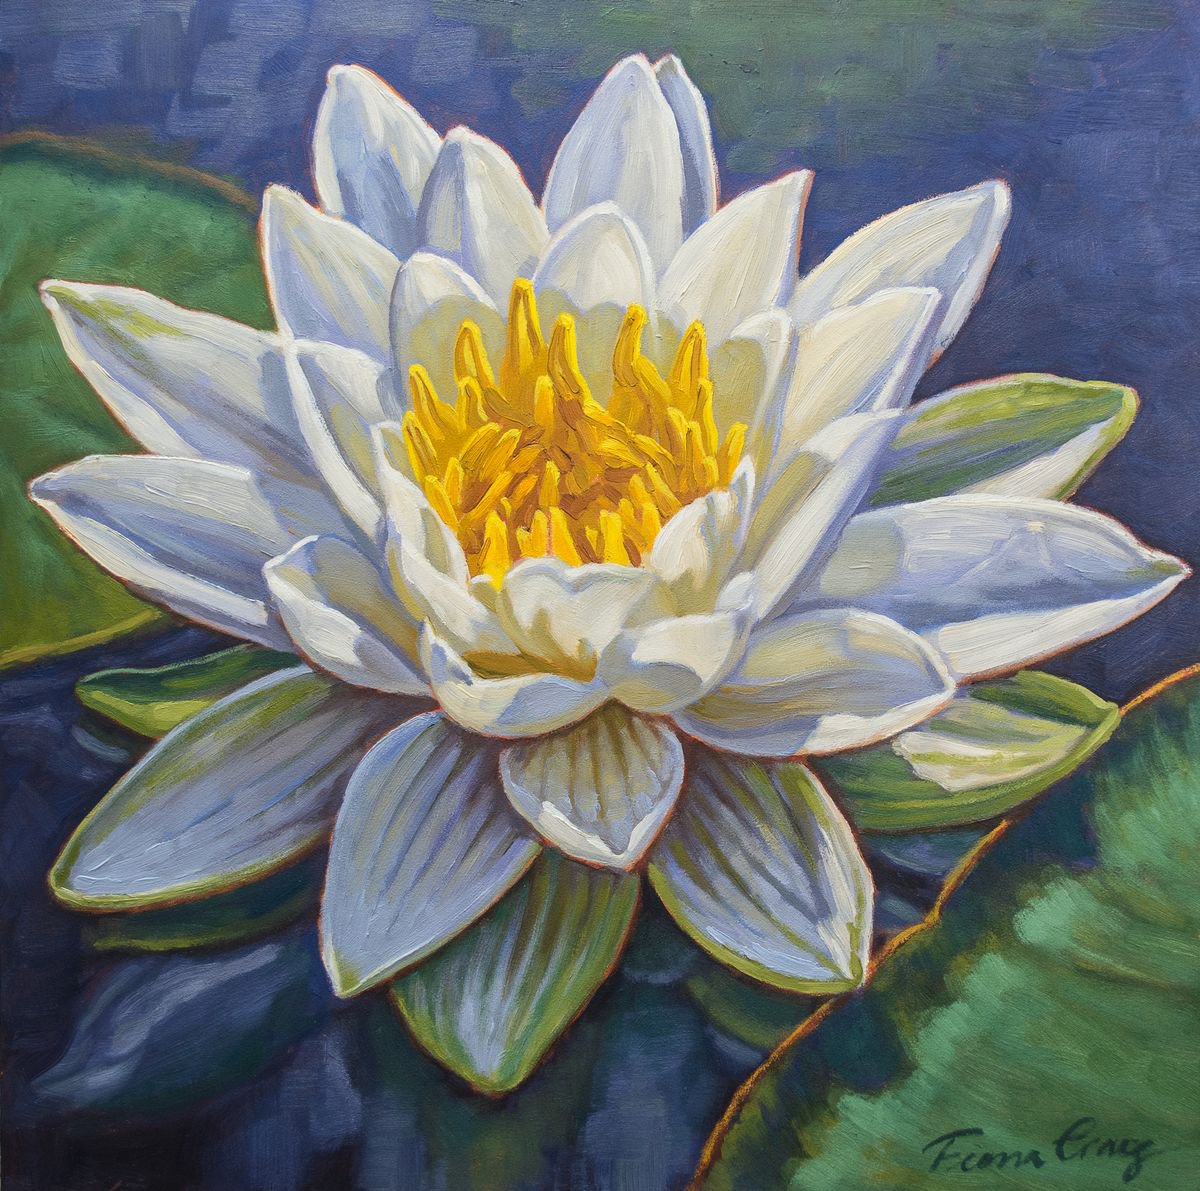 Water Lily Study 4 by Fiona Craig